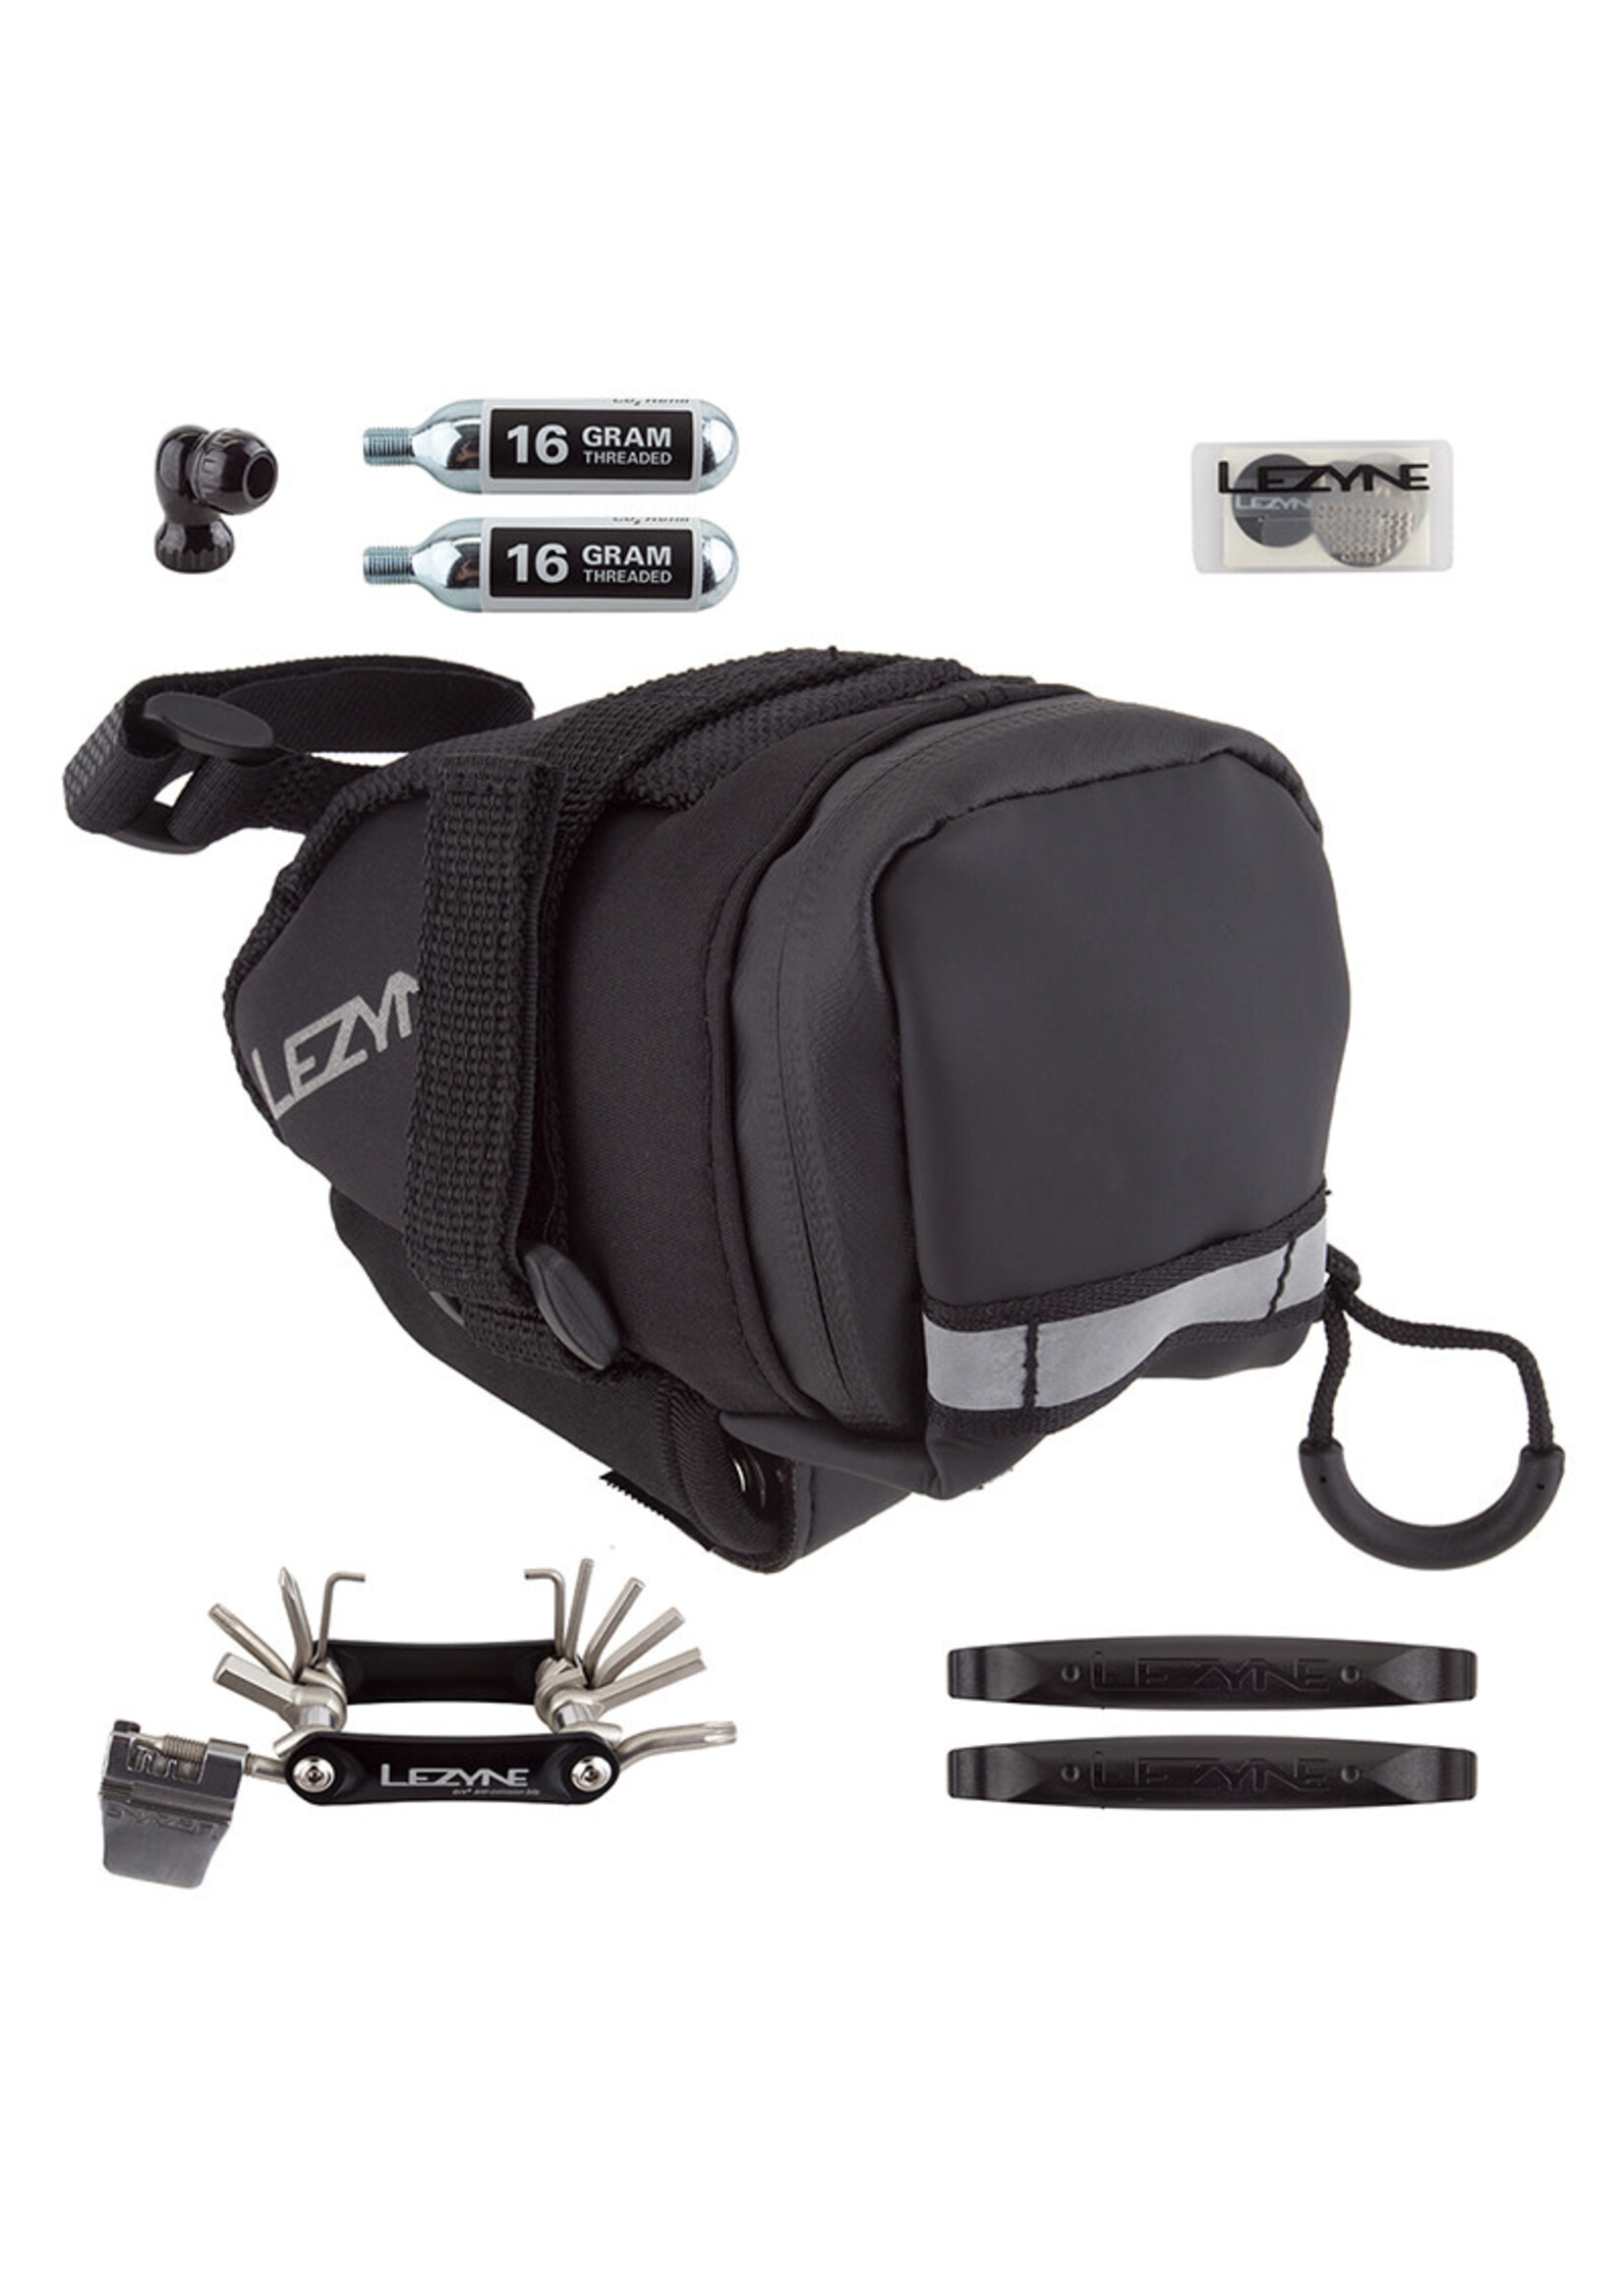 LEZYNE Lezyne M-Caddy Seat Bag with Twin Speed Drive 16g CO2, Rap6 Tool, SmartKit, and Composite Matrix Tire Levers: Black